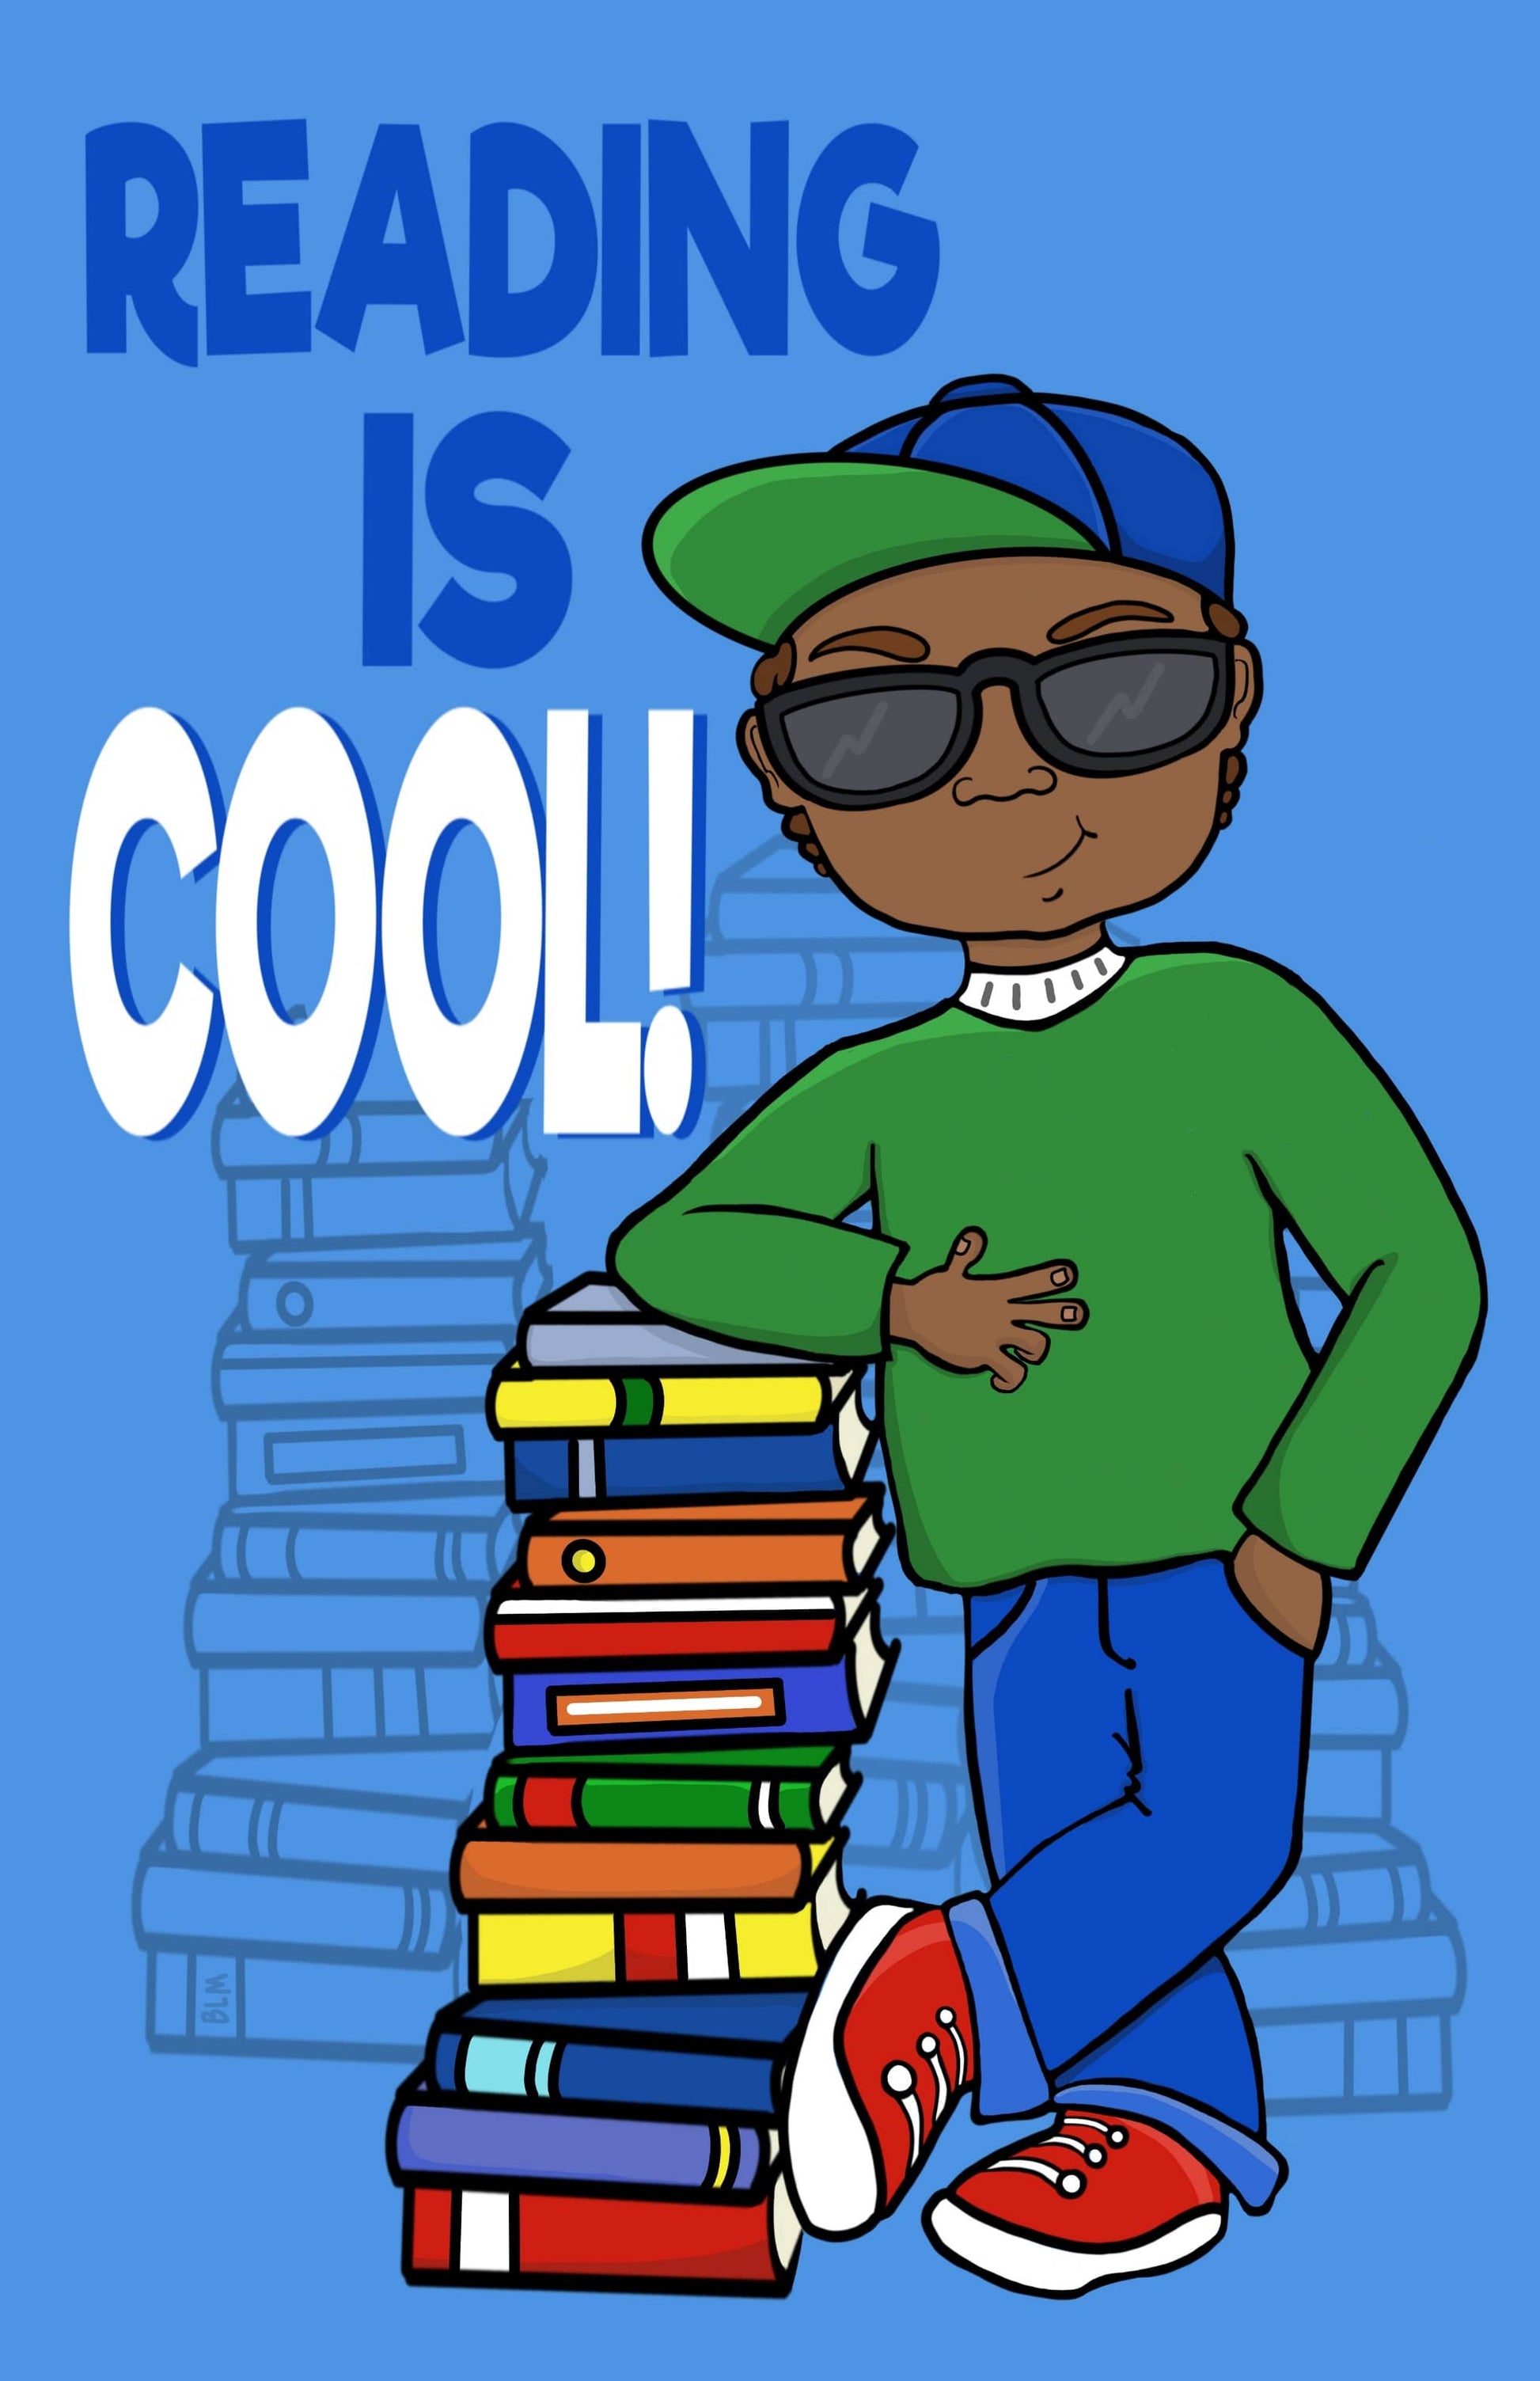 African American Boy Loves Reading Books Image